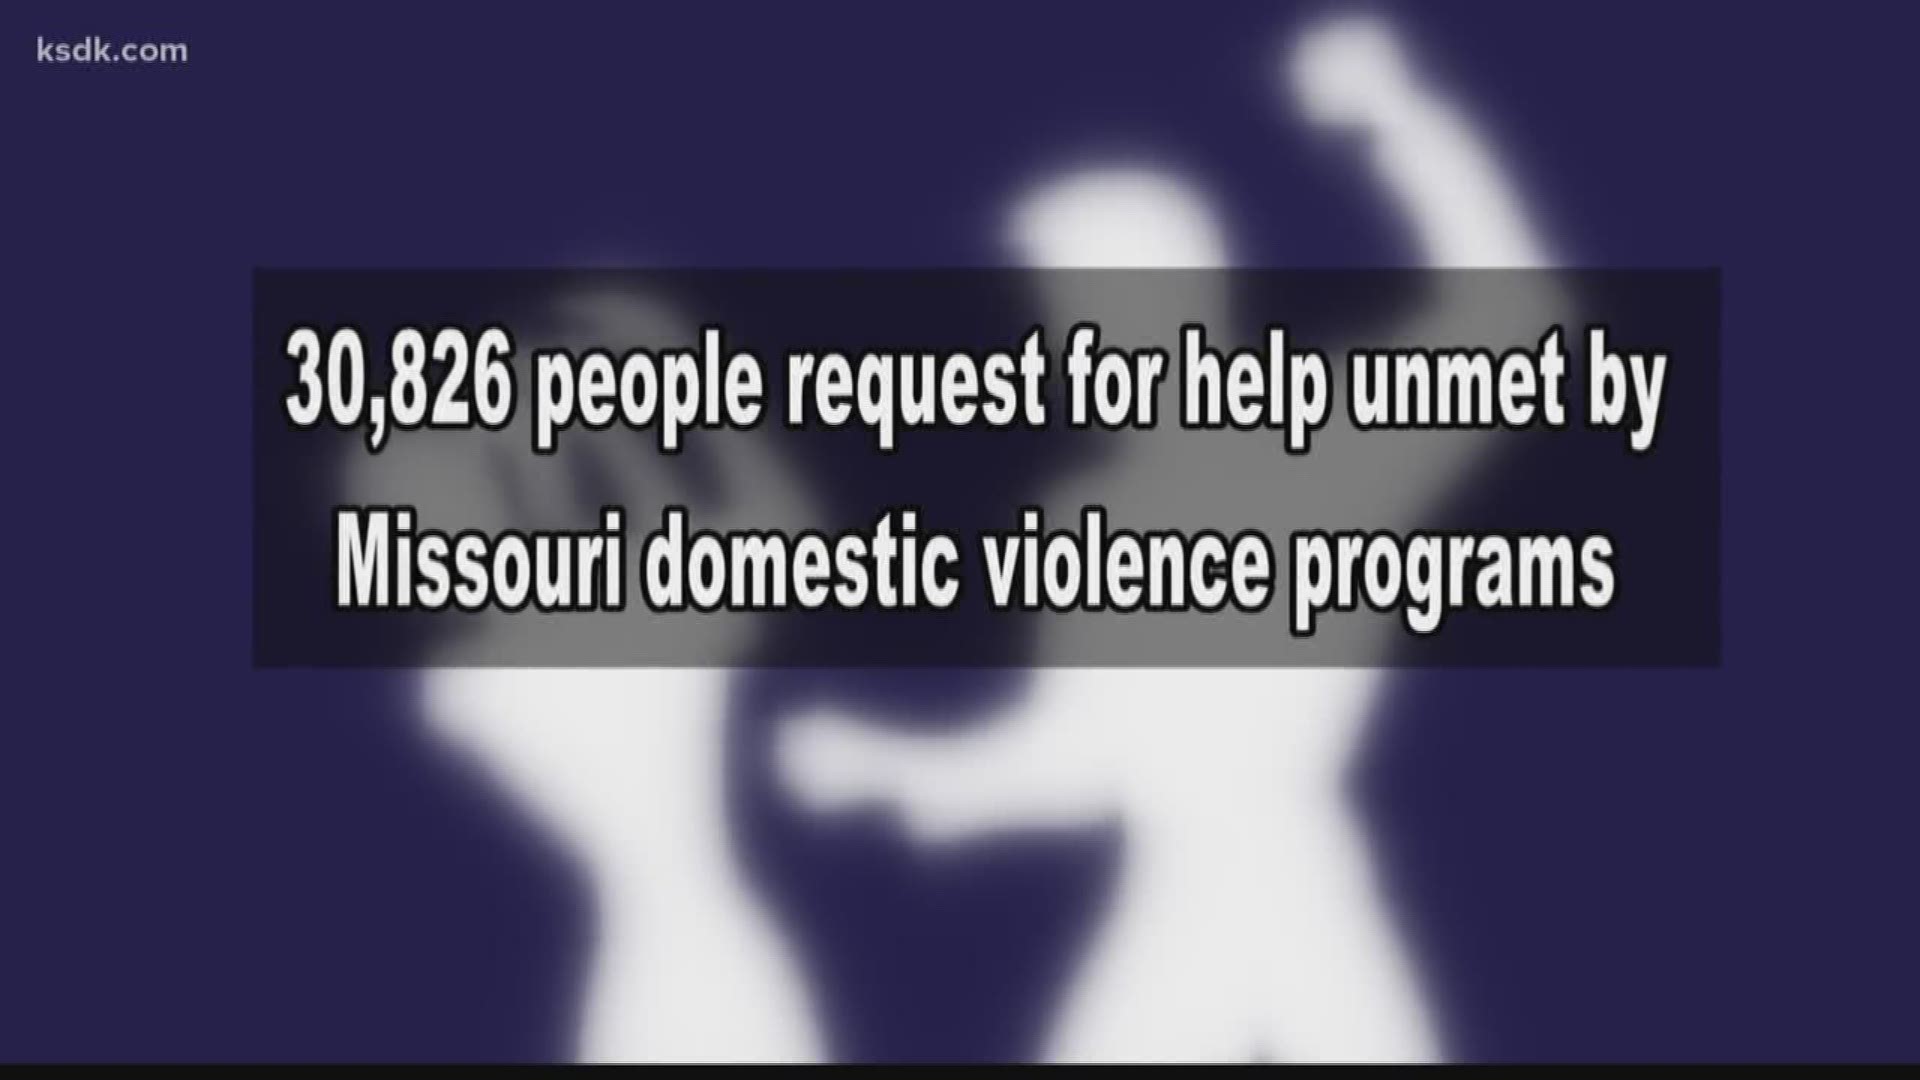 A new Missouri law bars landlords from kicking out domestic violence victims.